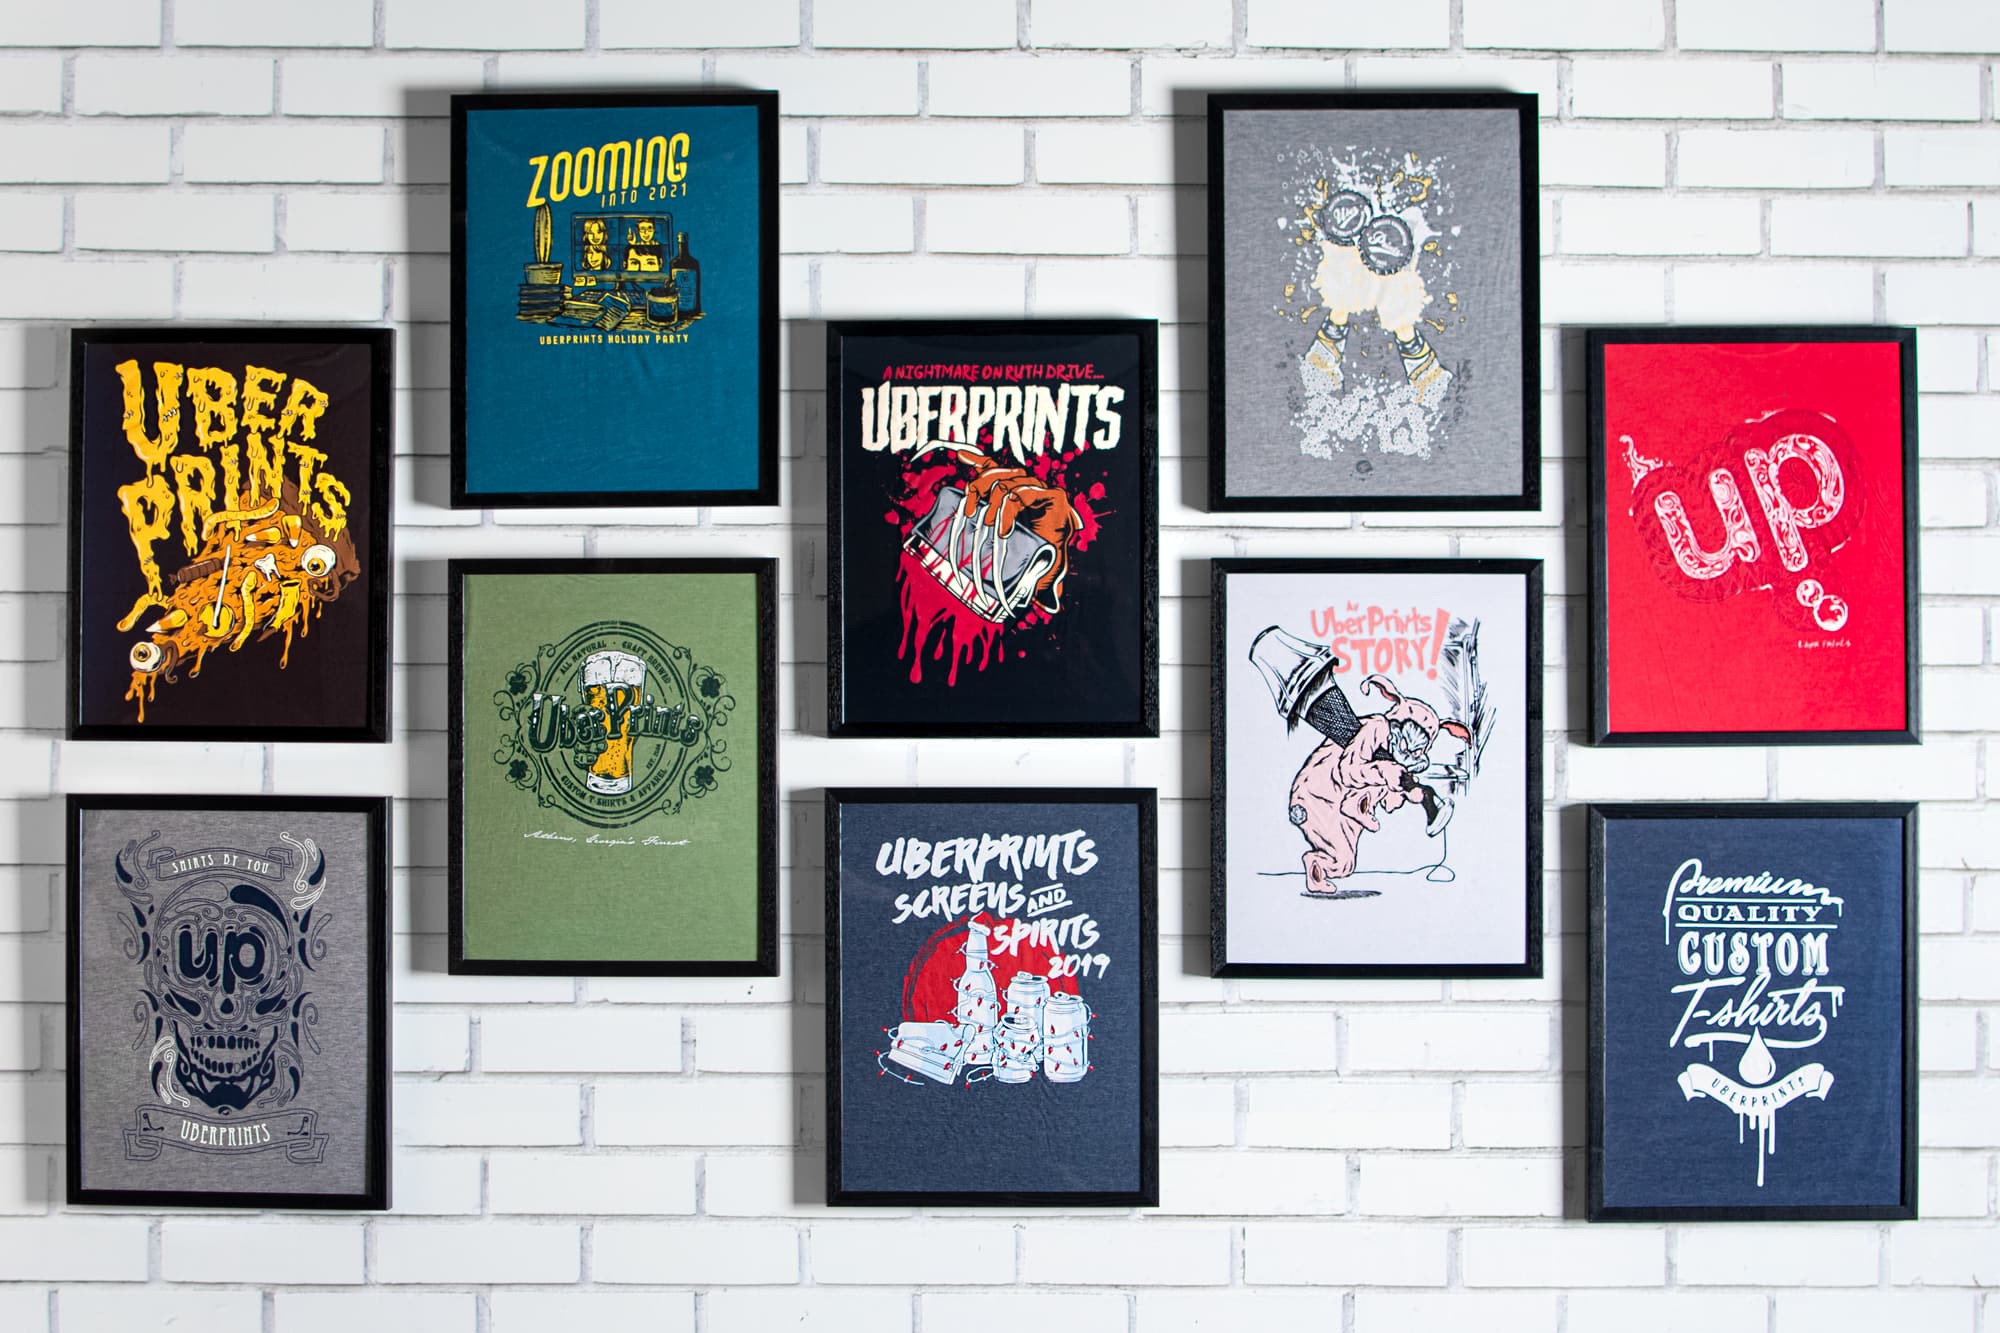 Pictured is our t-shirt wall. Previous years' t-shirt designs are framed and added to the wall. This is the wall before the Halloween addition.